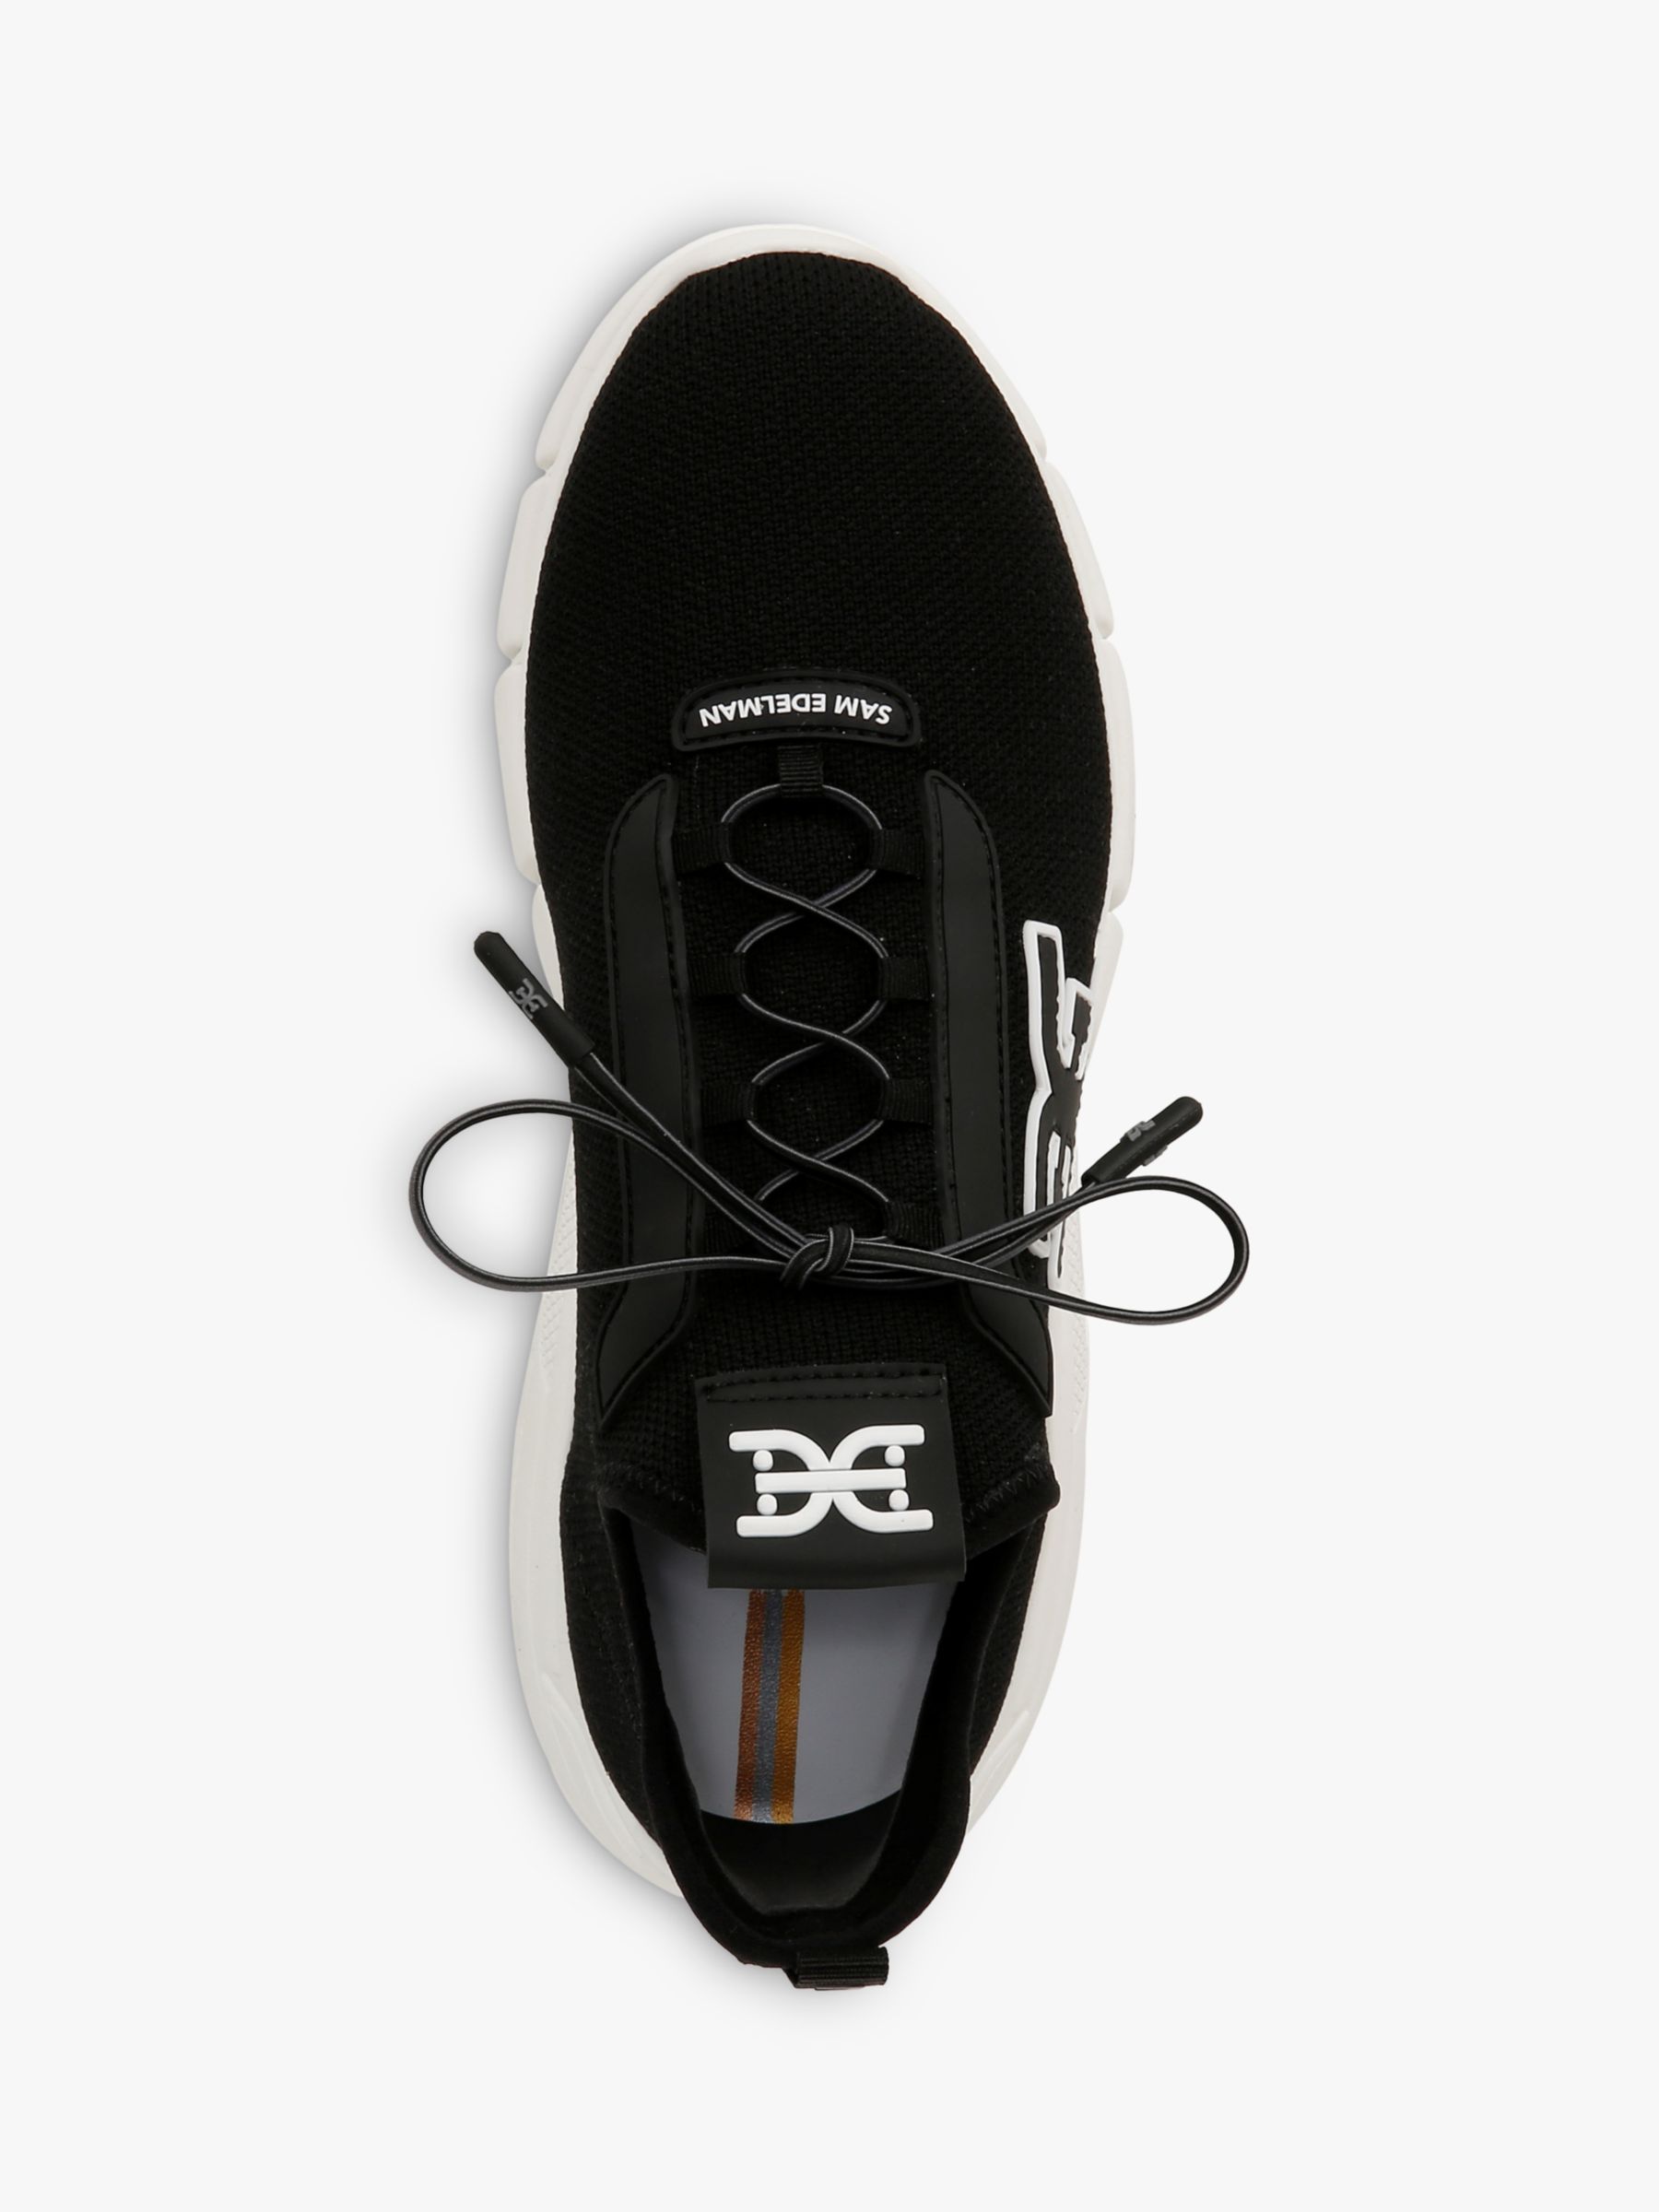 Buy Sam Edelman Cami Knitted Trainers, Black Online at johnlewis.com